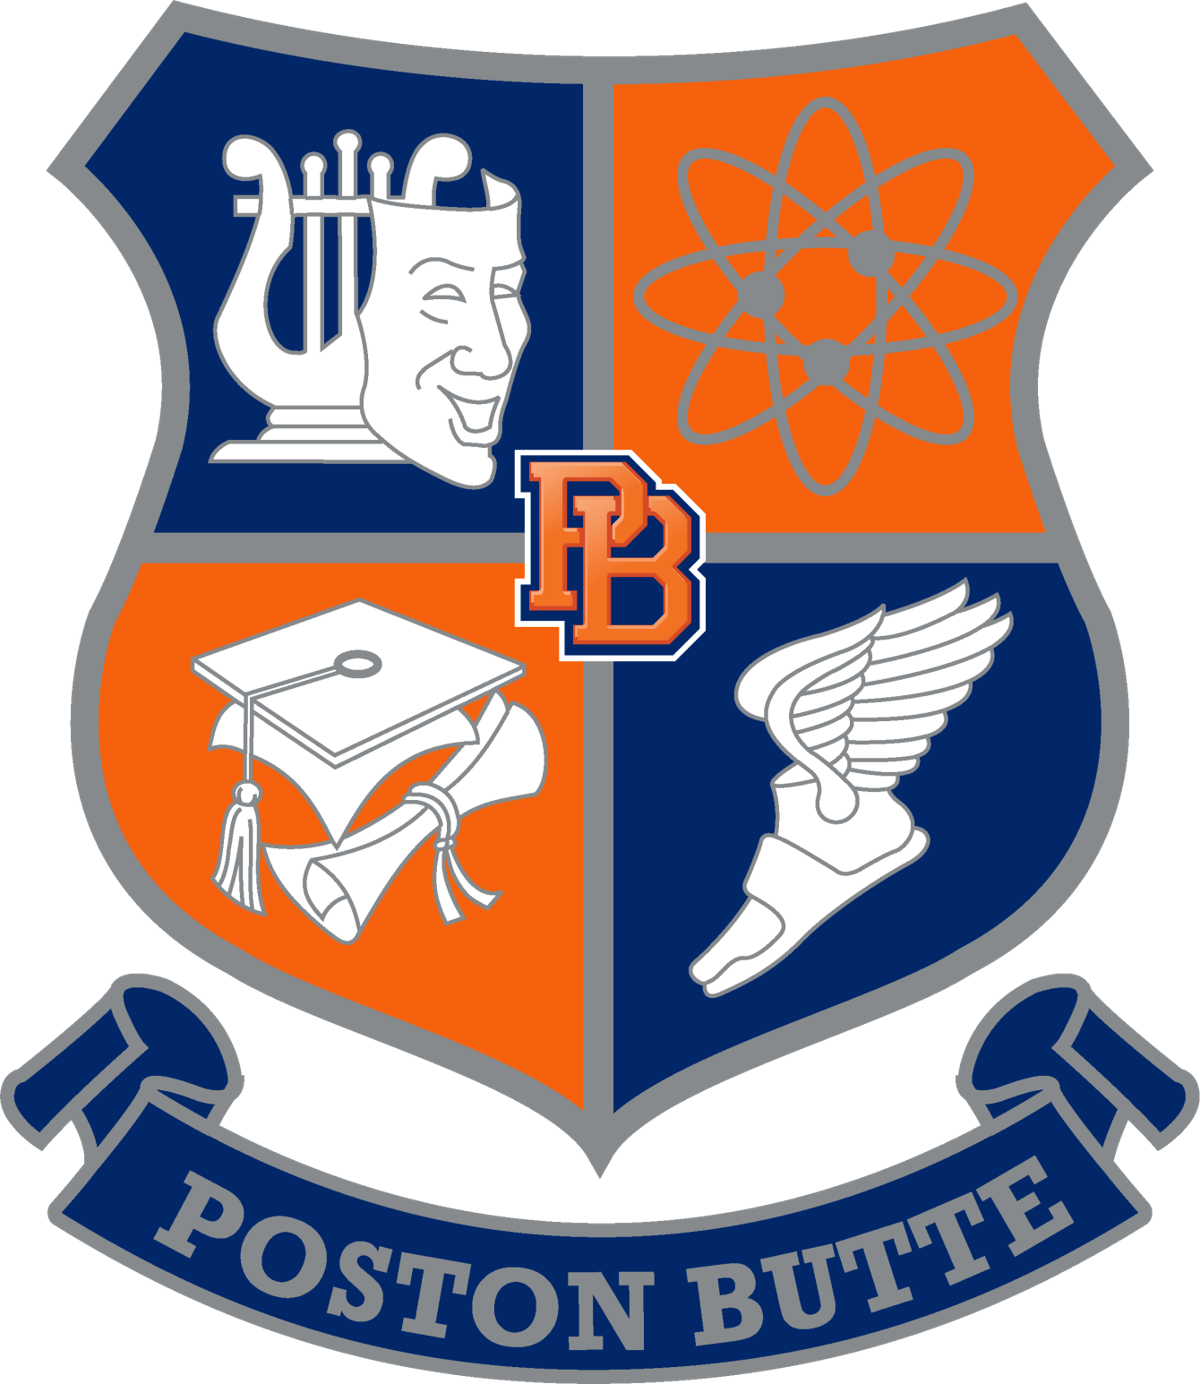 Poston Butte teacher suspected of intoxication resigns | Local News